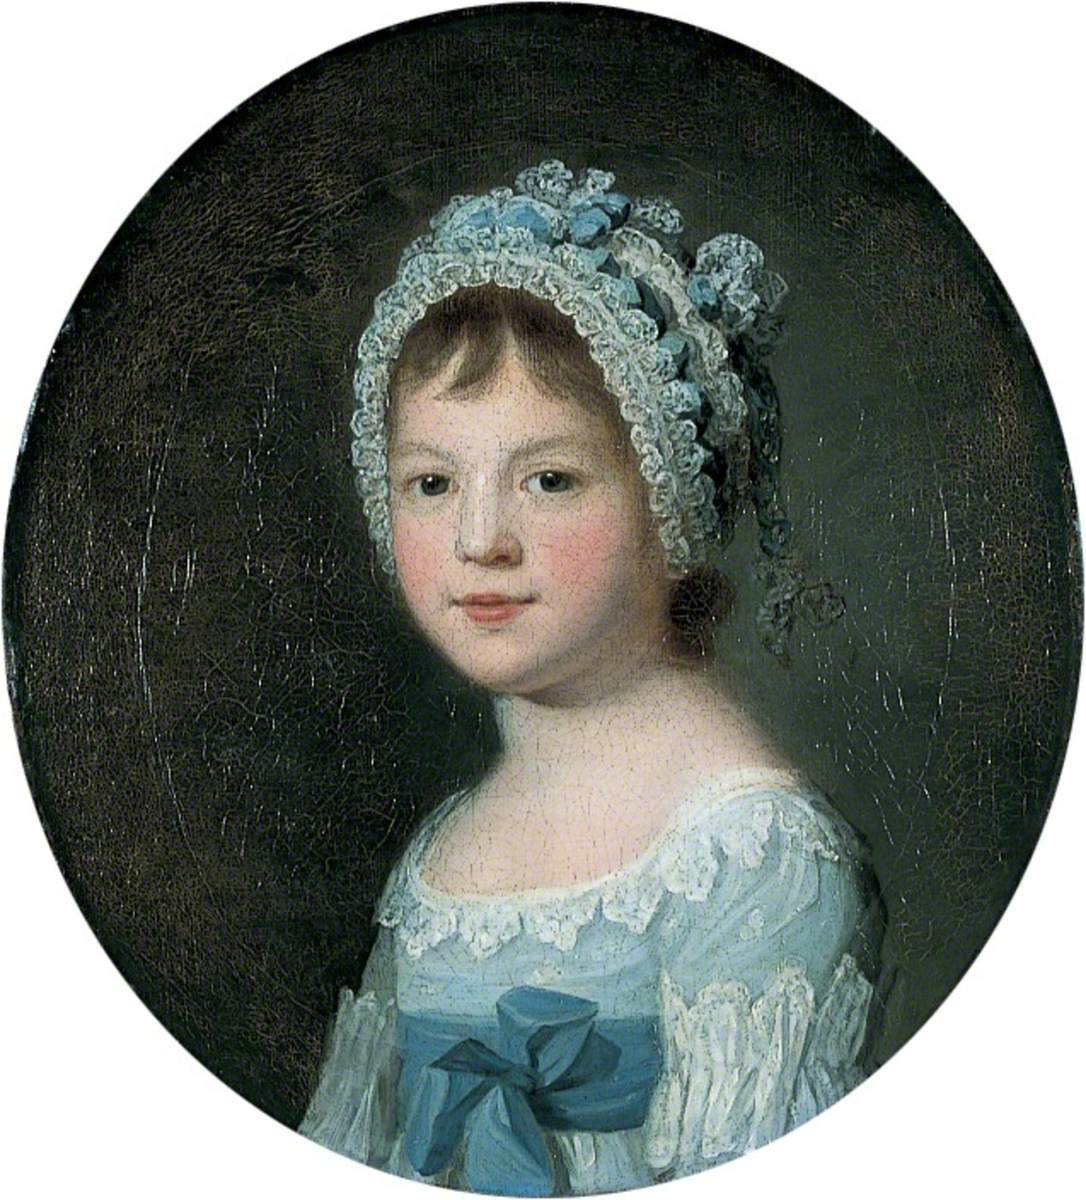 An oval, bust-length portrait of a young girl turned to the left but looks directly at the viewer. She wears a light blue dress embellished with white lace and a large blue bow. Her bonnet is made of lace and blue ribbon and covers most of her hair. The young girl has bangs and rosy cheeks; she has a sweet expression, with a slight smile. 